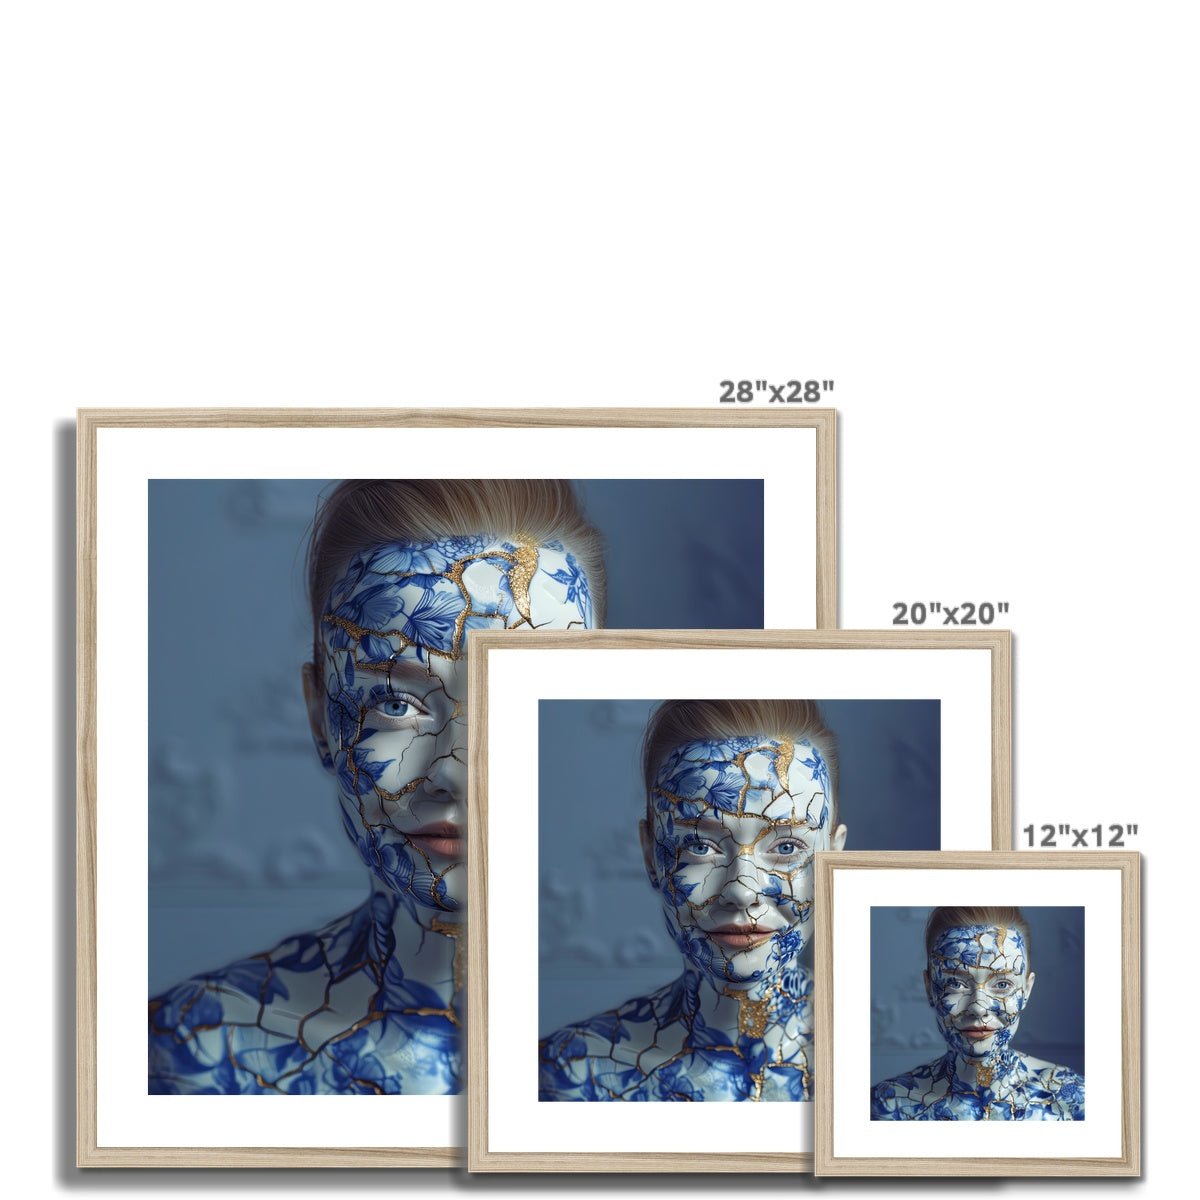 Resilient Beauty (Porcelain and Gold Kintsugi Woman) Framed & Mounted Print - Pixel Gallery